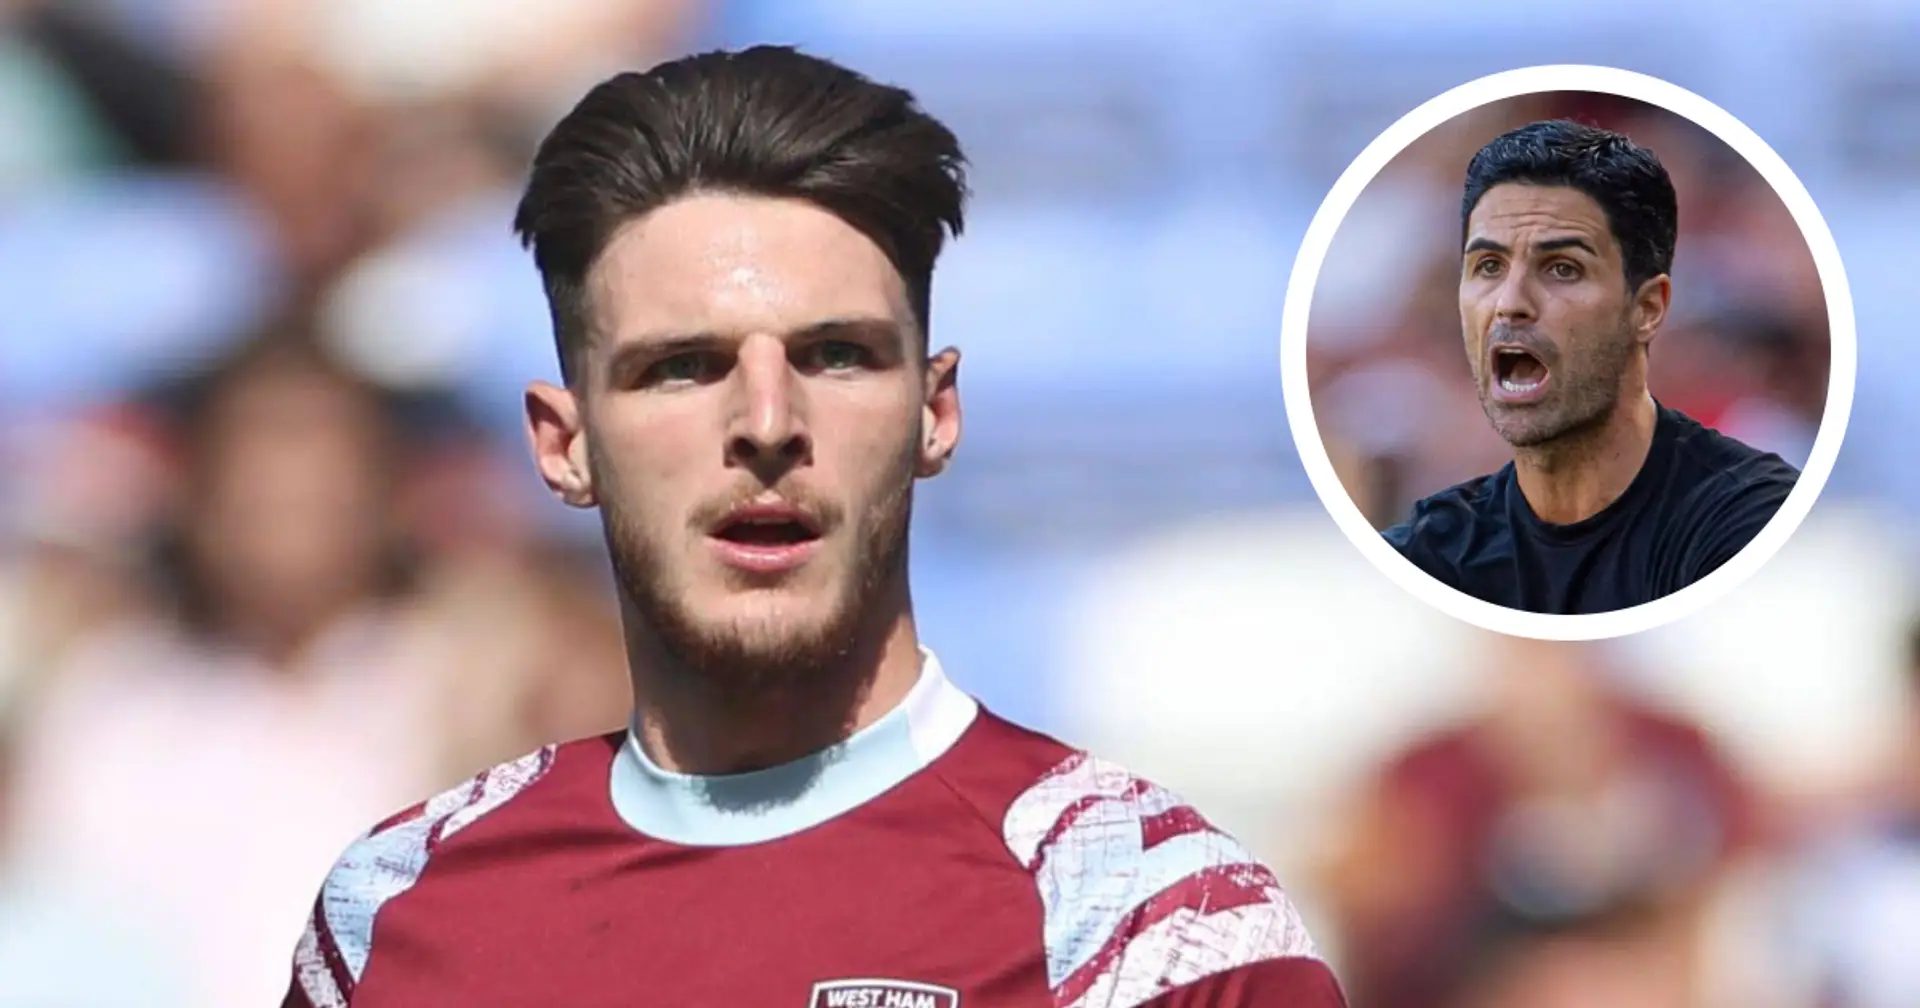 West Ham reject opening bid, Arsenal progress in personal terms: latest updates on Declan Rice from top sources